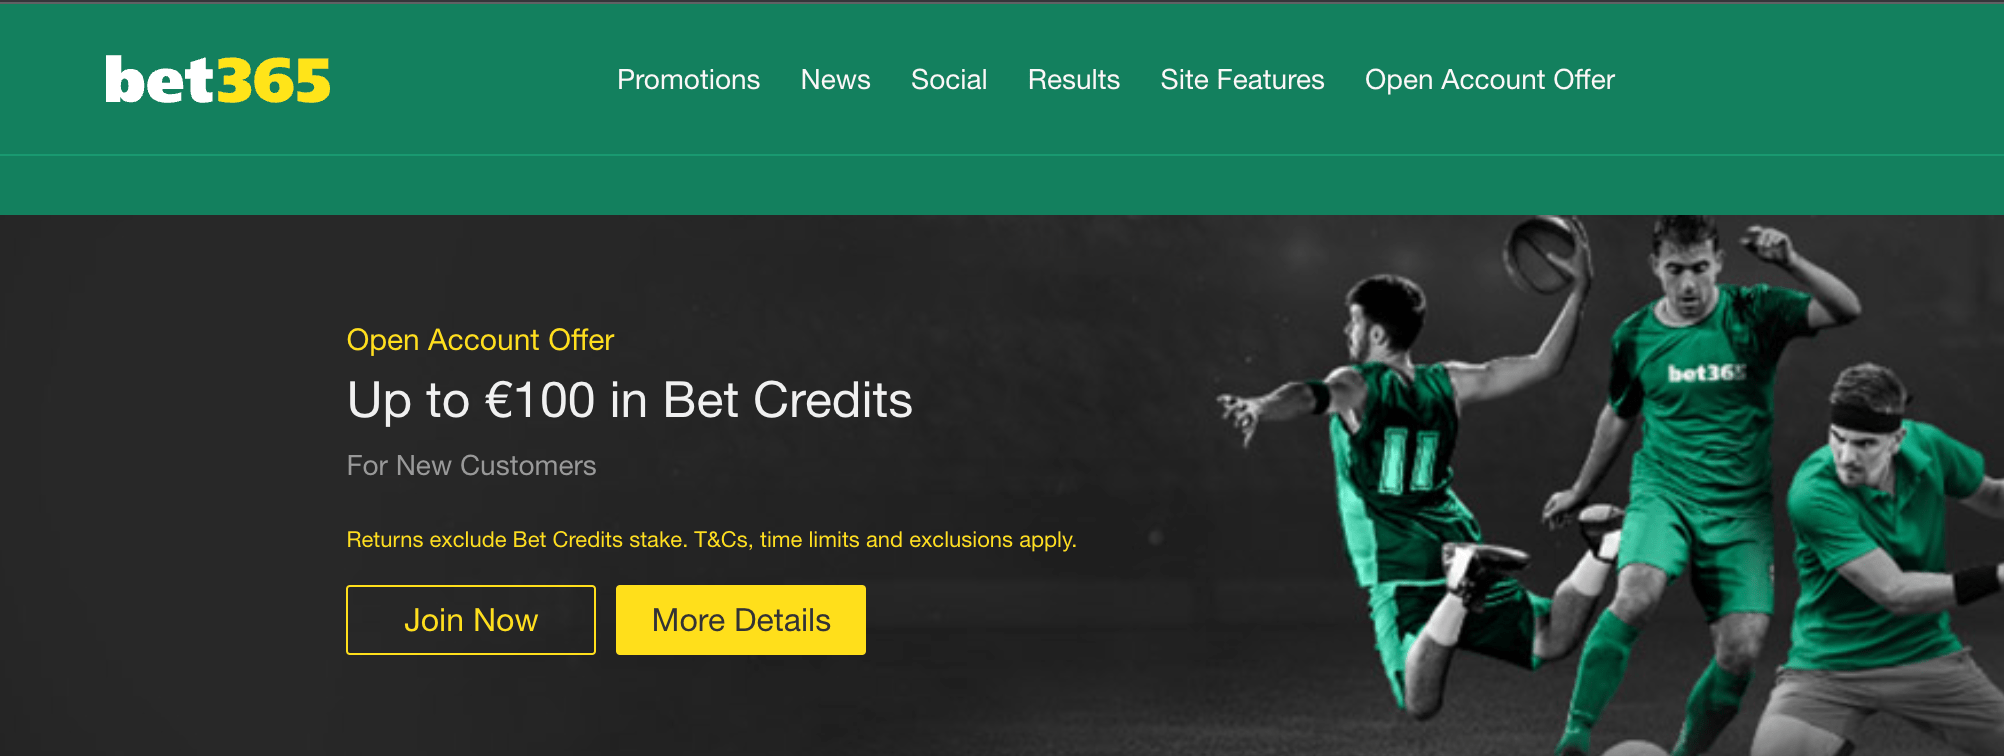 Bet365: The Casino Site That Offers The Best Customer Service For Indian Players